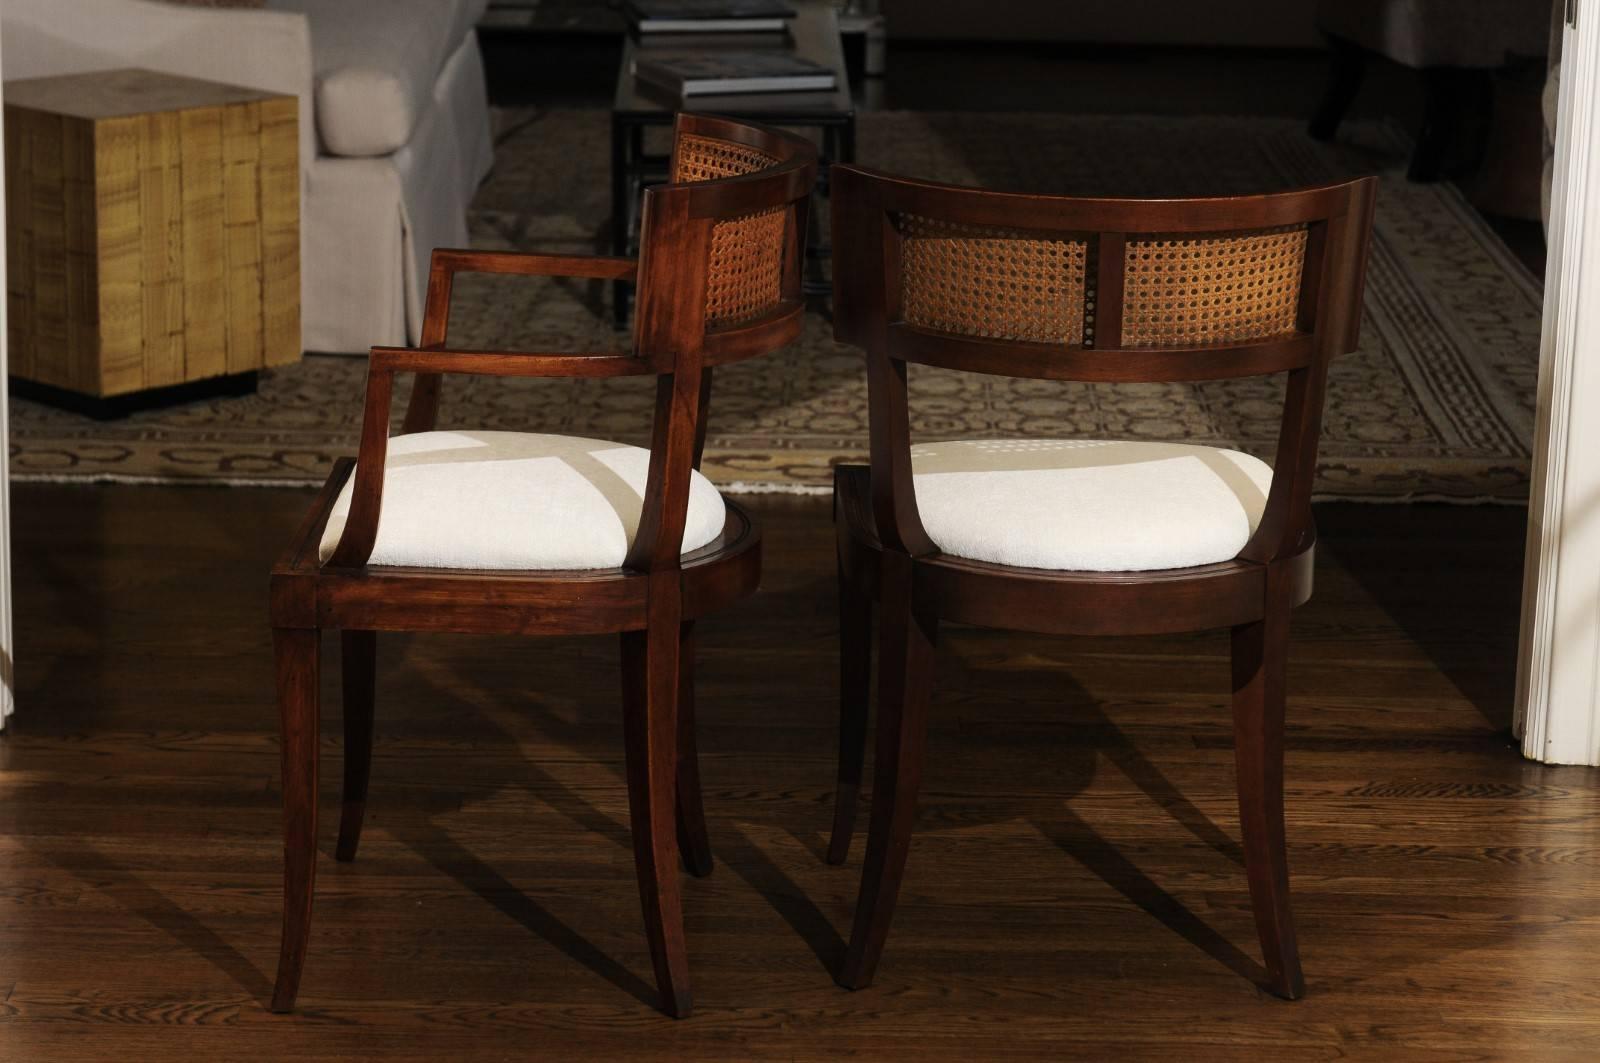 The rarest of the rare: An exceptional, meticulously restored set of ten (10) cane back Klismos dining chairs by Baker Furniture, circa 1958. This design is routinely attributed to the esteemed Michael Taylor. Expertly crafted solid cherry